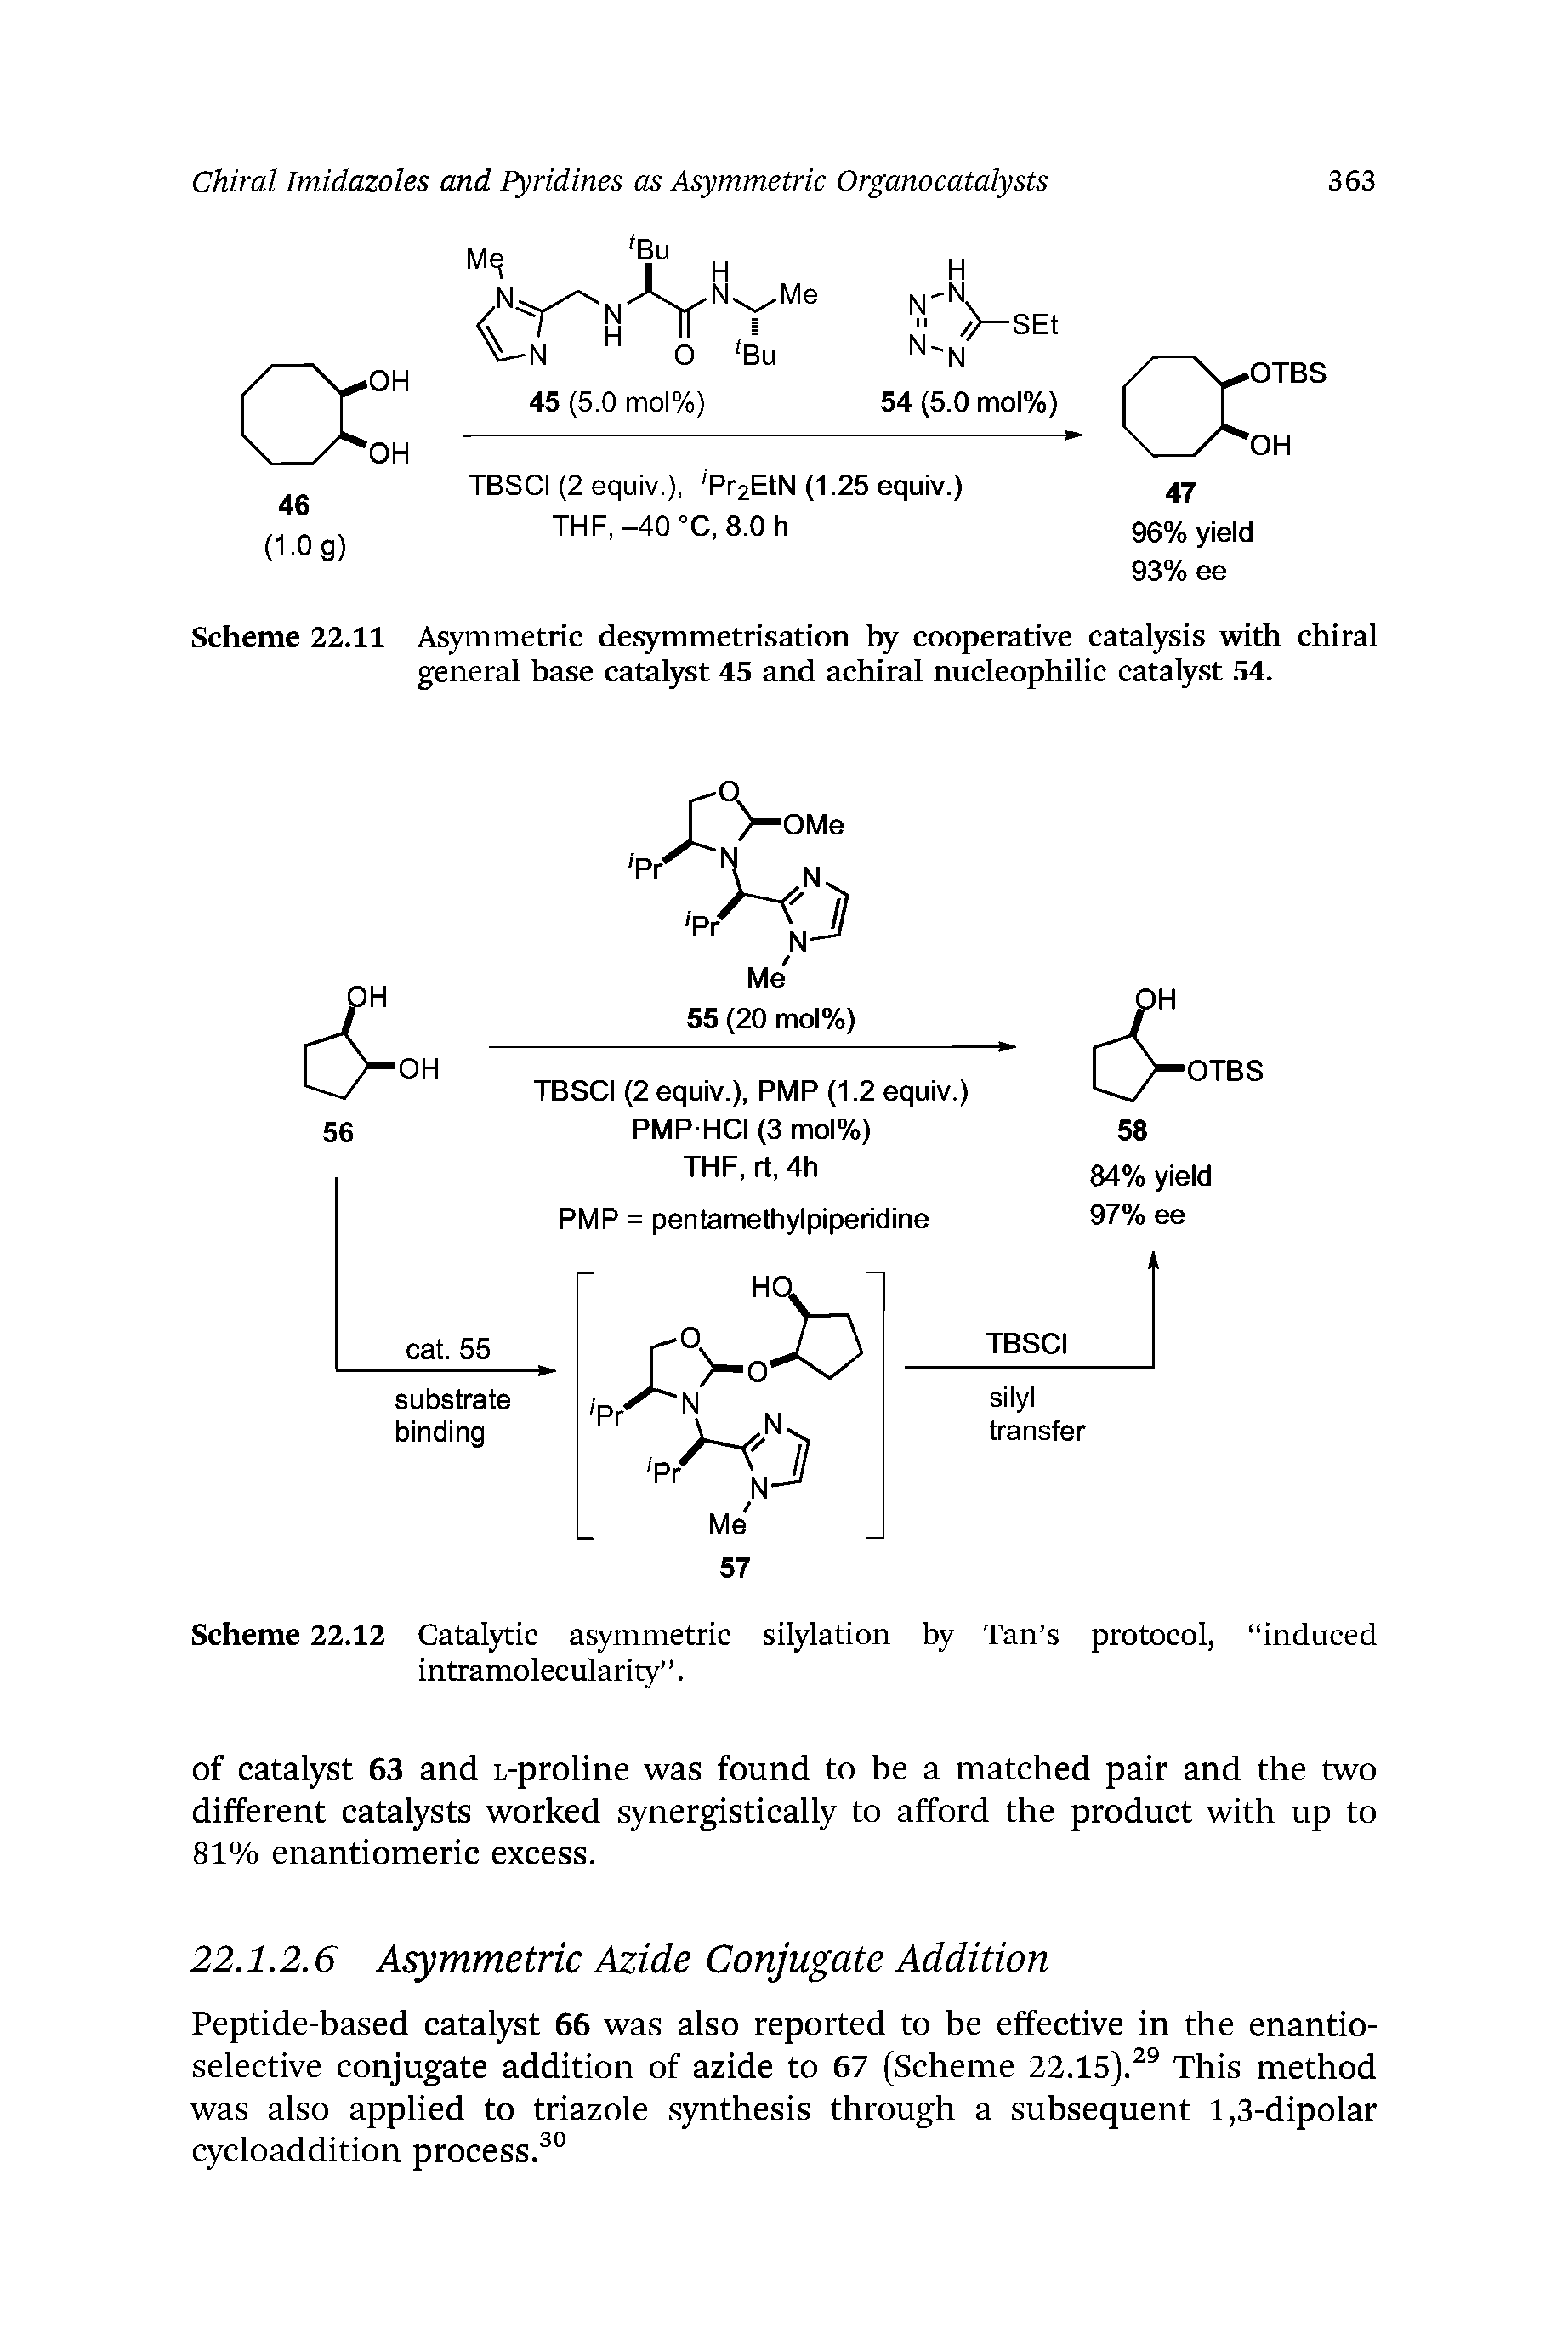 Scheme 22.11 Asymmetric desymmetrisation by cooperative catalysis with chiral general base catalyst 45 and achiral nucleophilic catalyst 54.